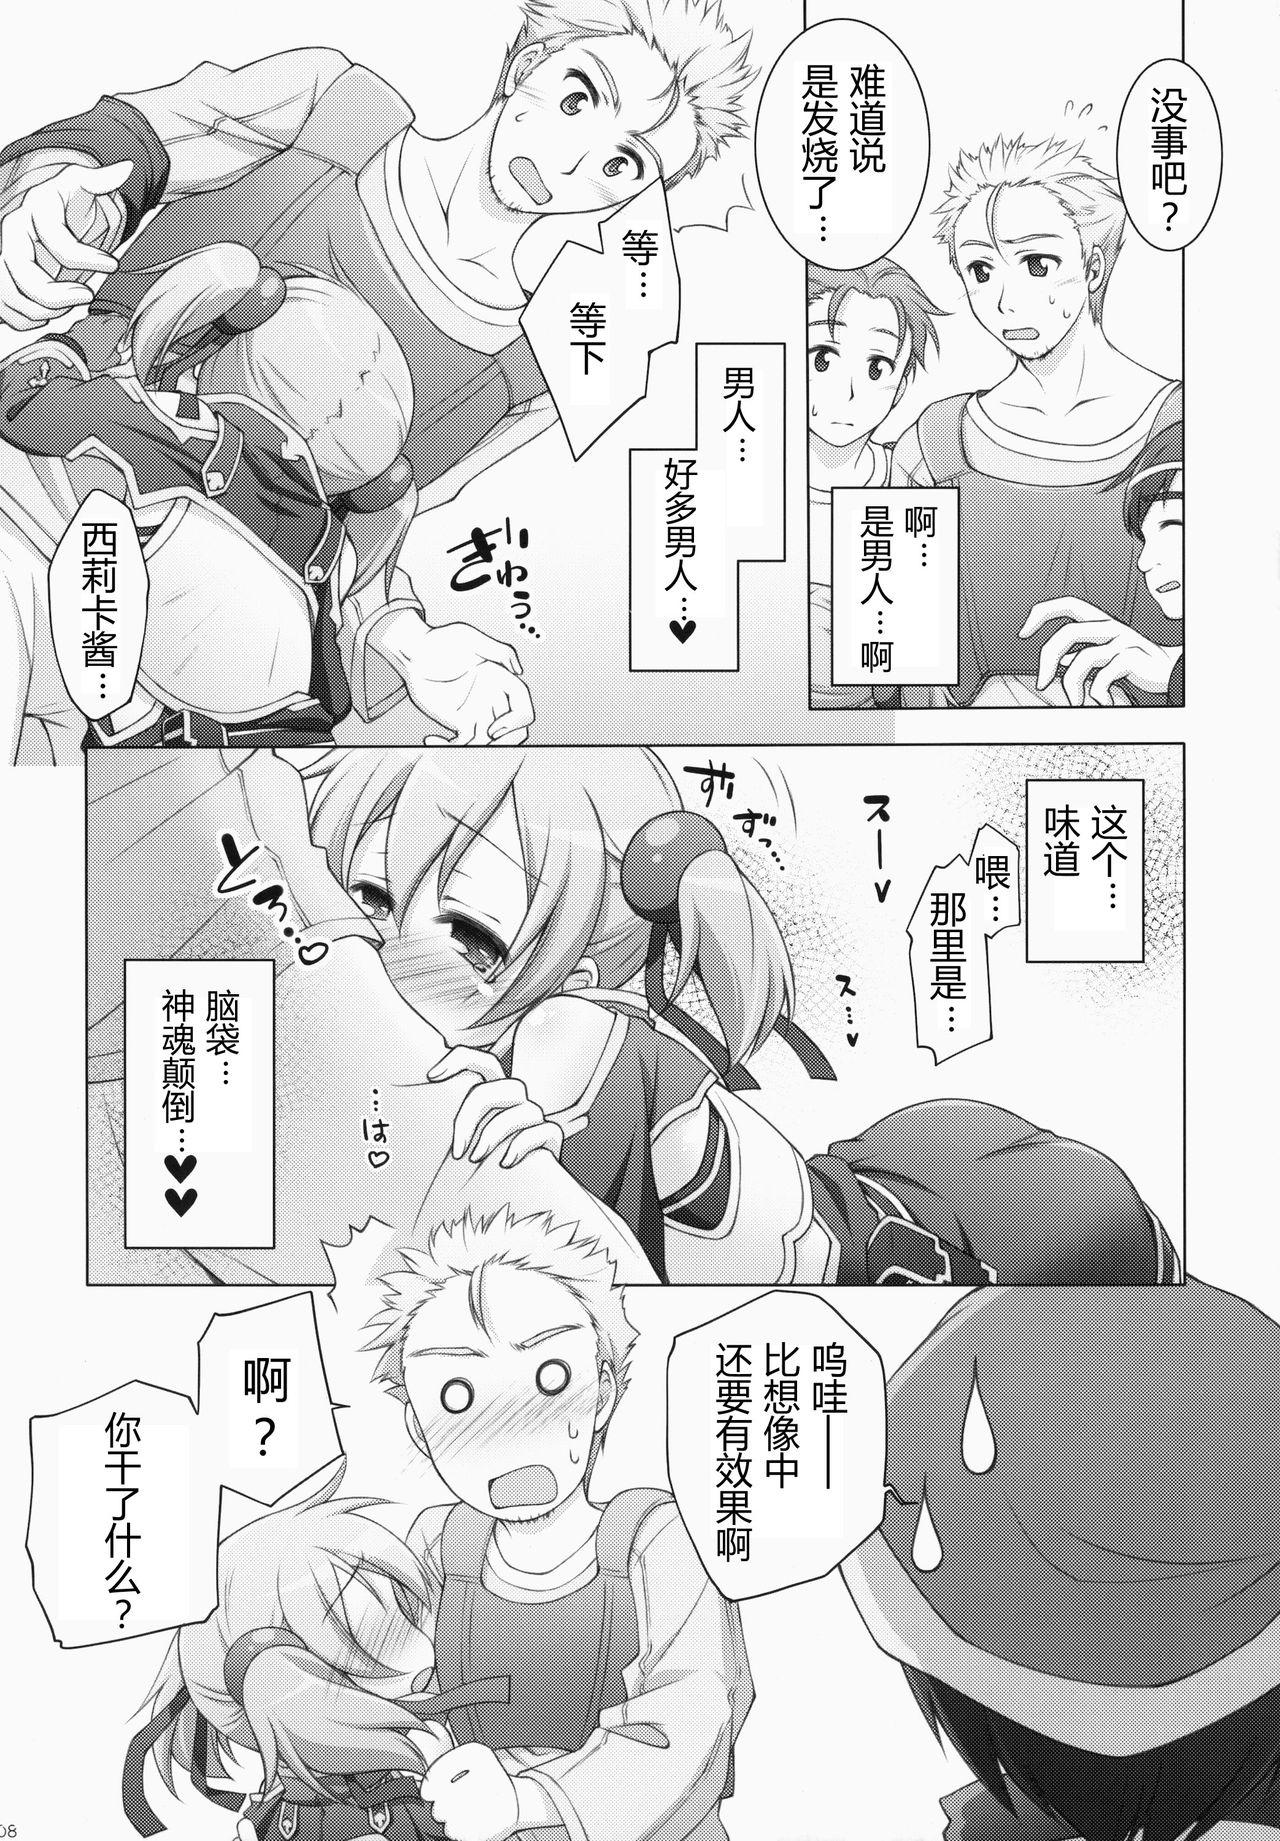 Brother Sister Digital x Temptation - Sword art online Cowgirl - Page 8